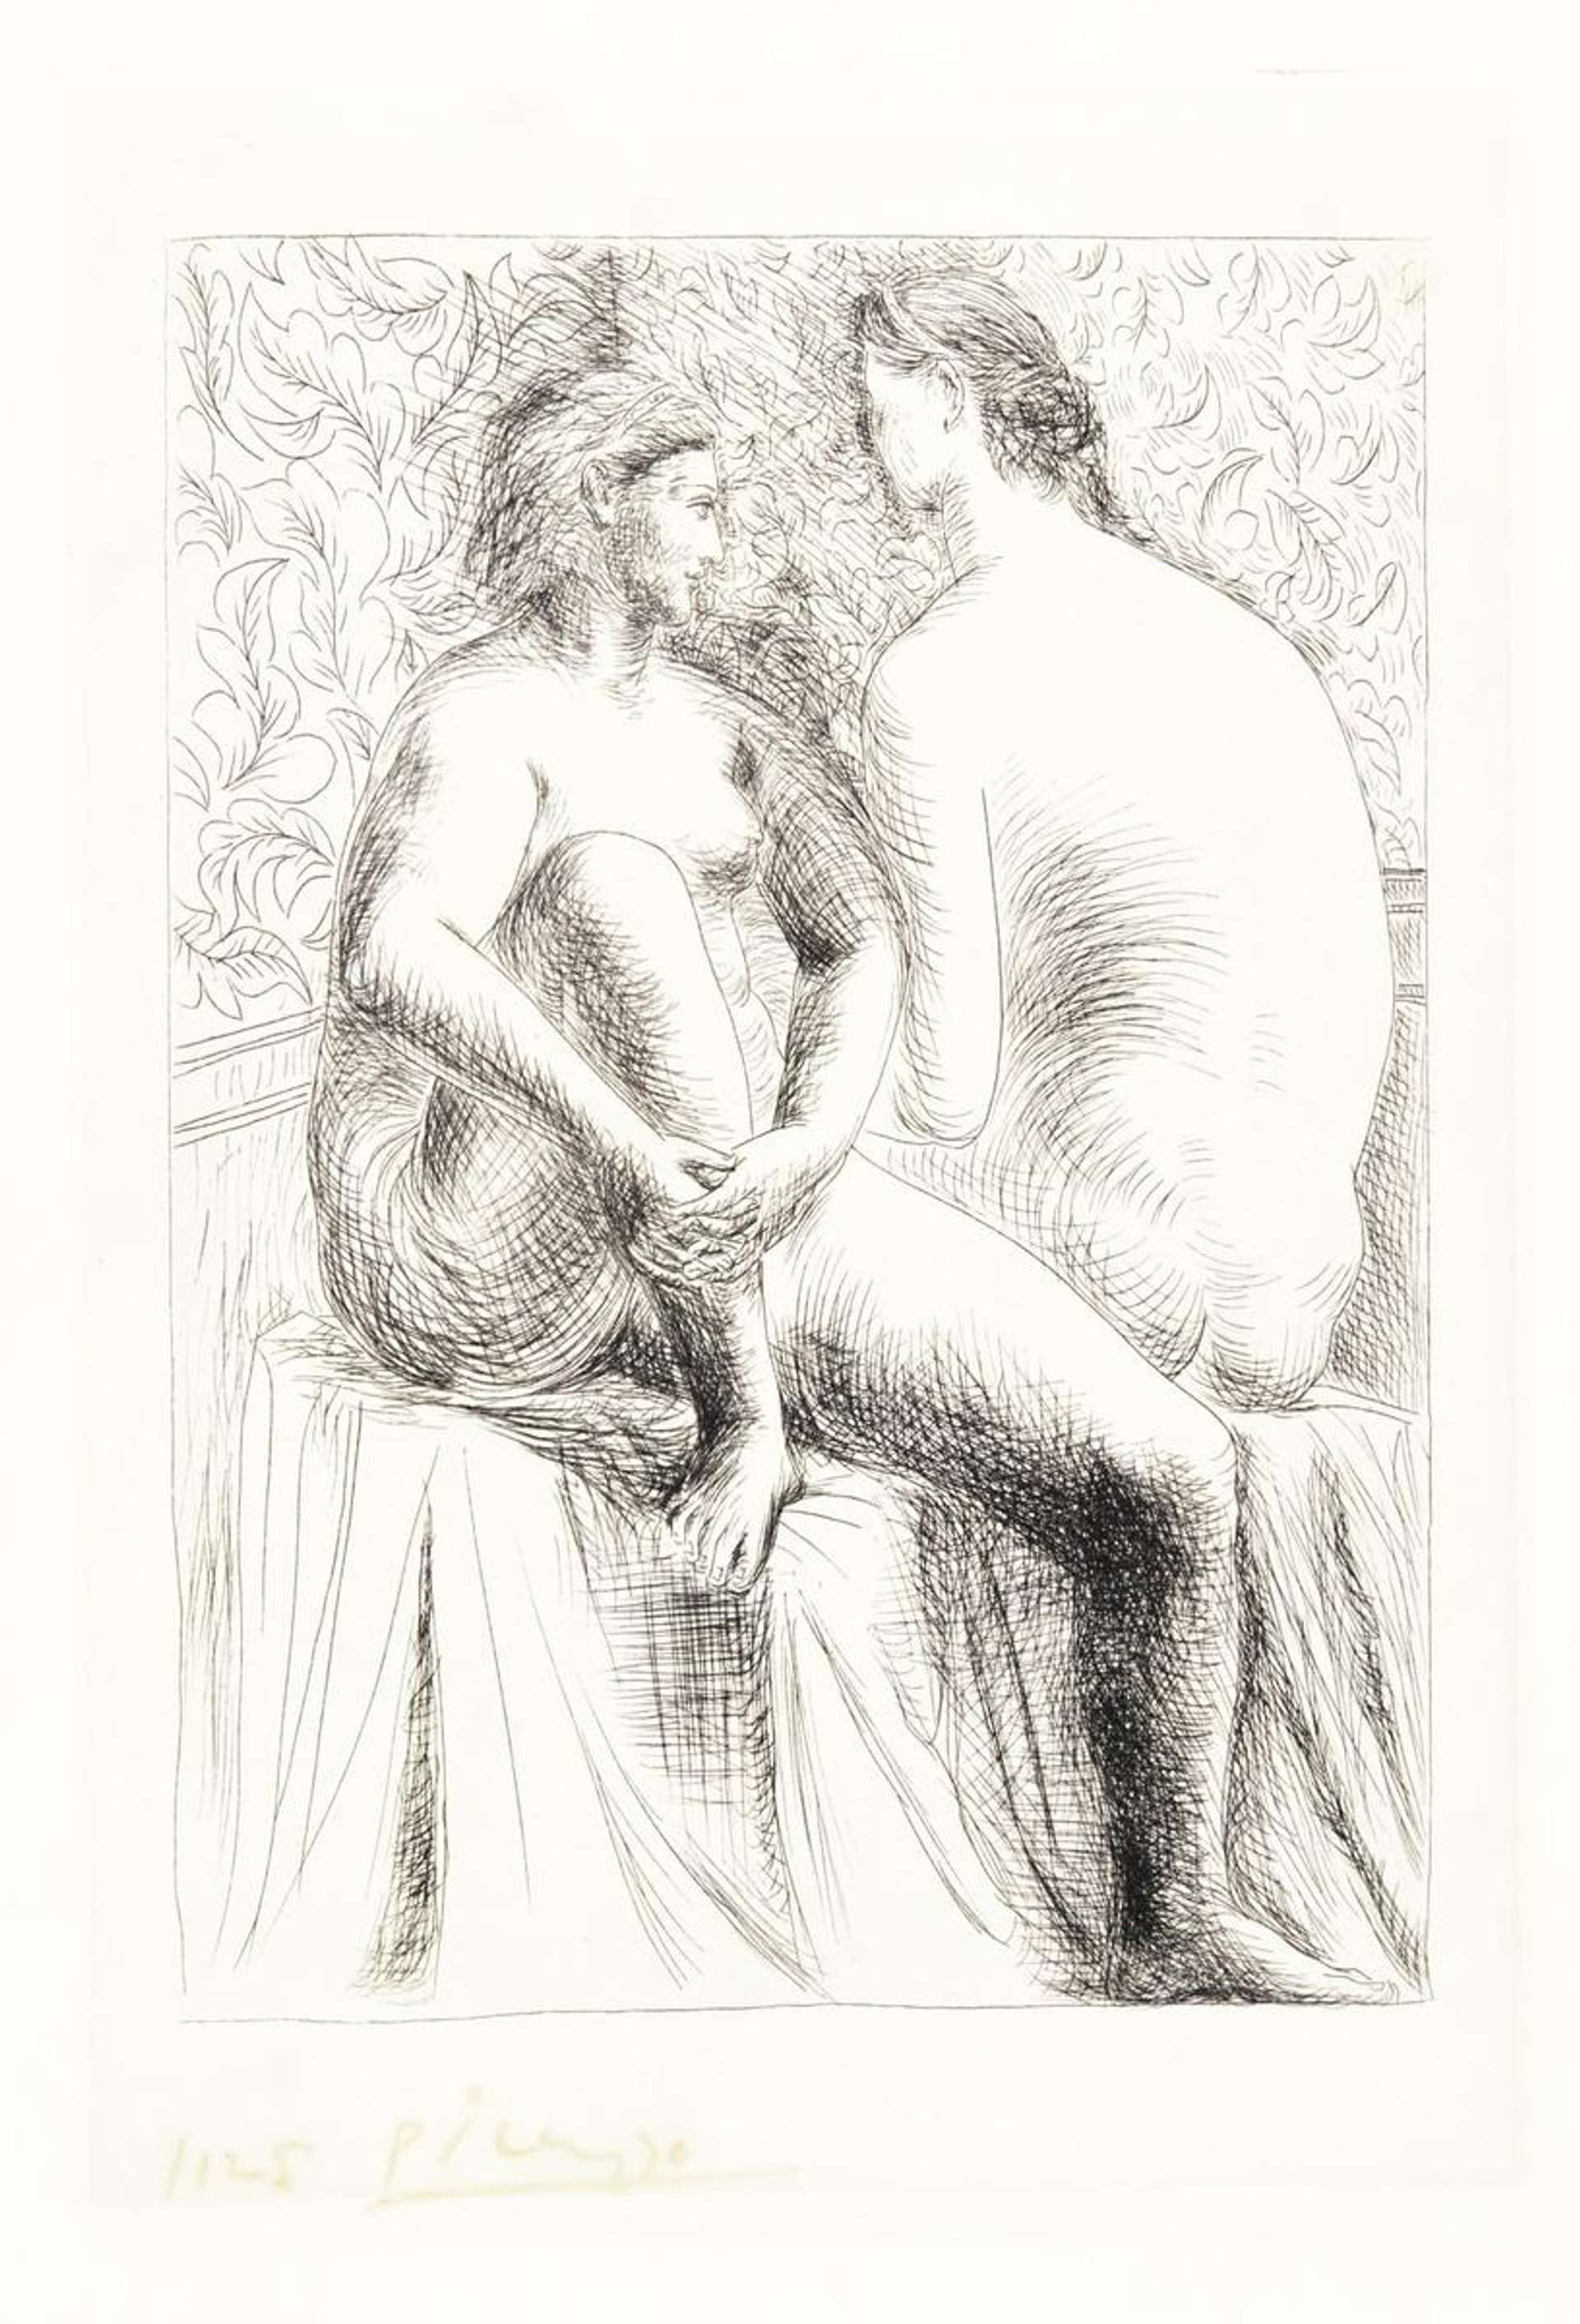 This print depicts two nude females engaging in conversation. The palette is monochrome and one of the women is facing away from the viewer.